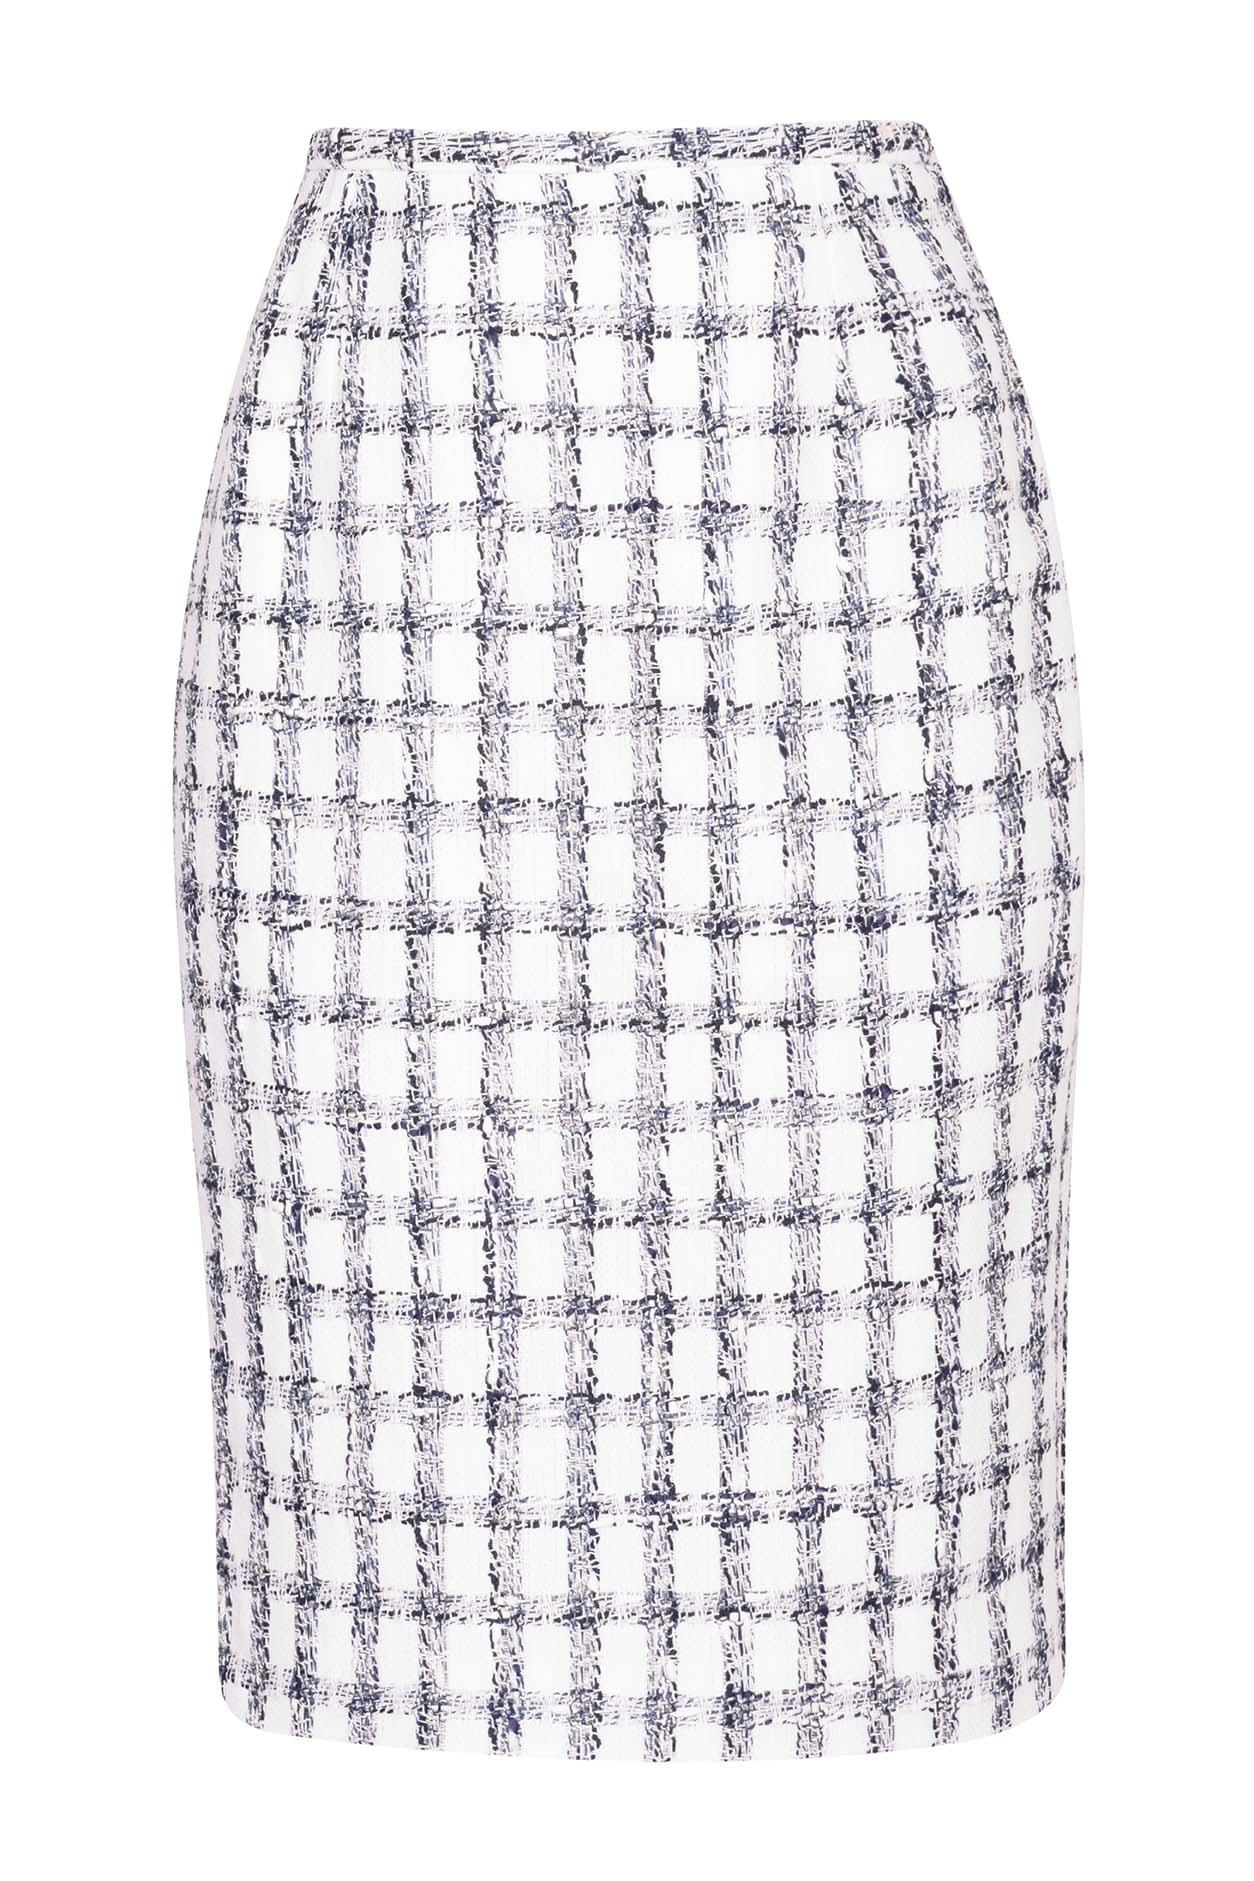 Tweed Pencil Skirt in White with Navy Overchecks - Penny